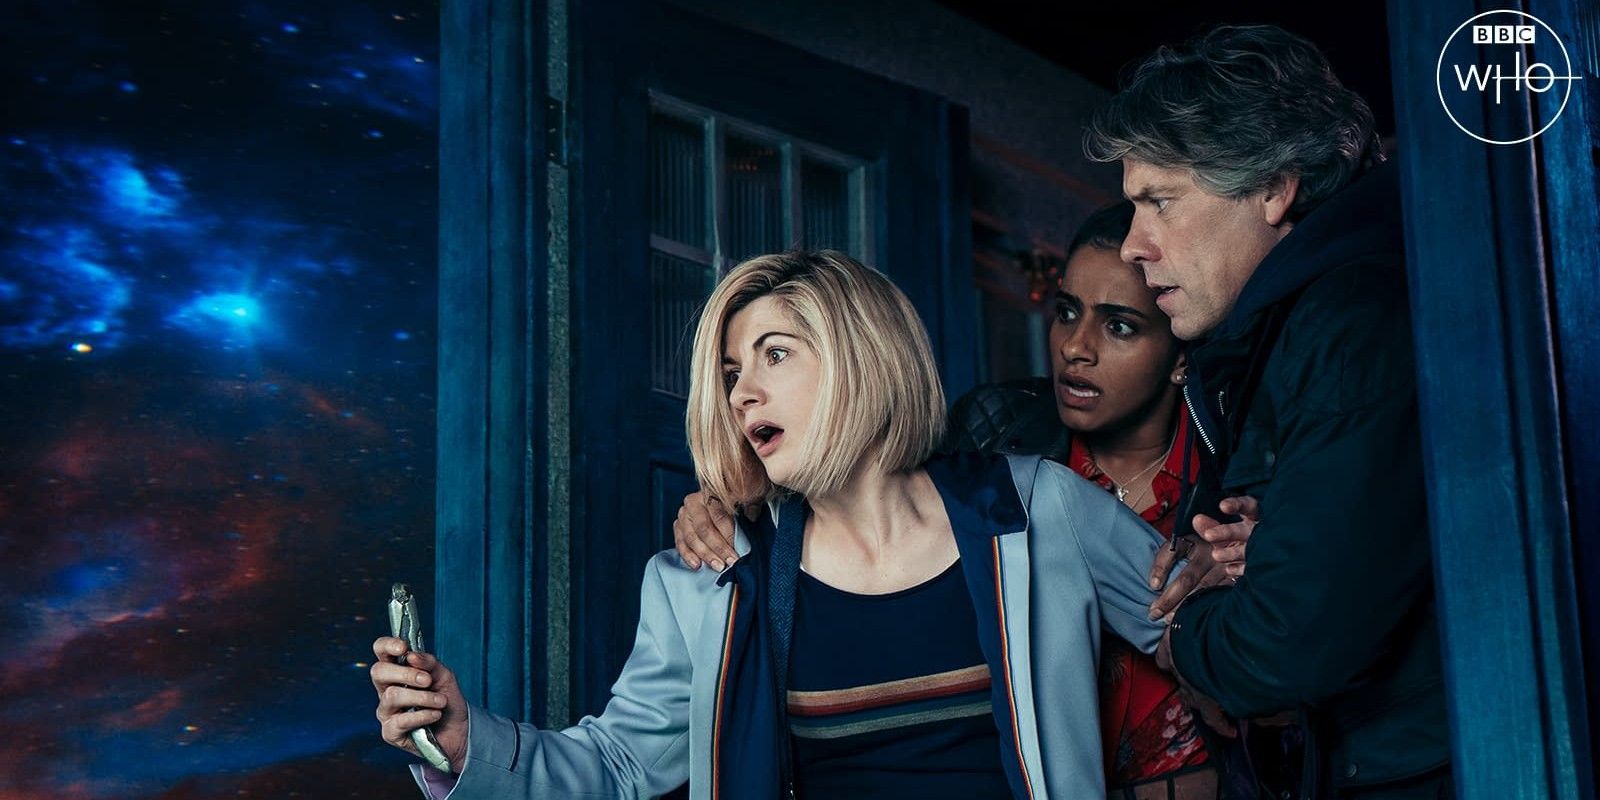 The Doctor looks out at space shocked with her companions behind her.